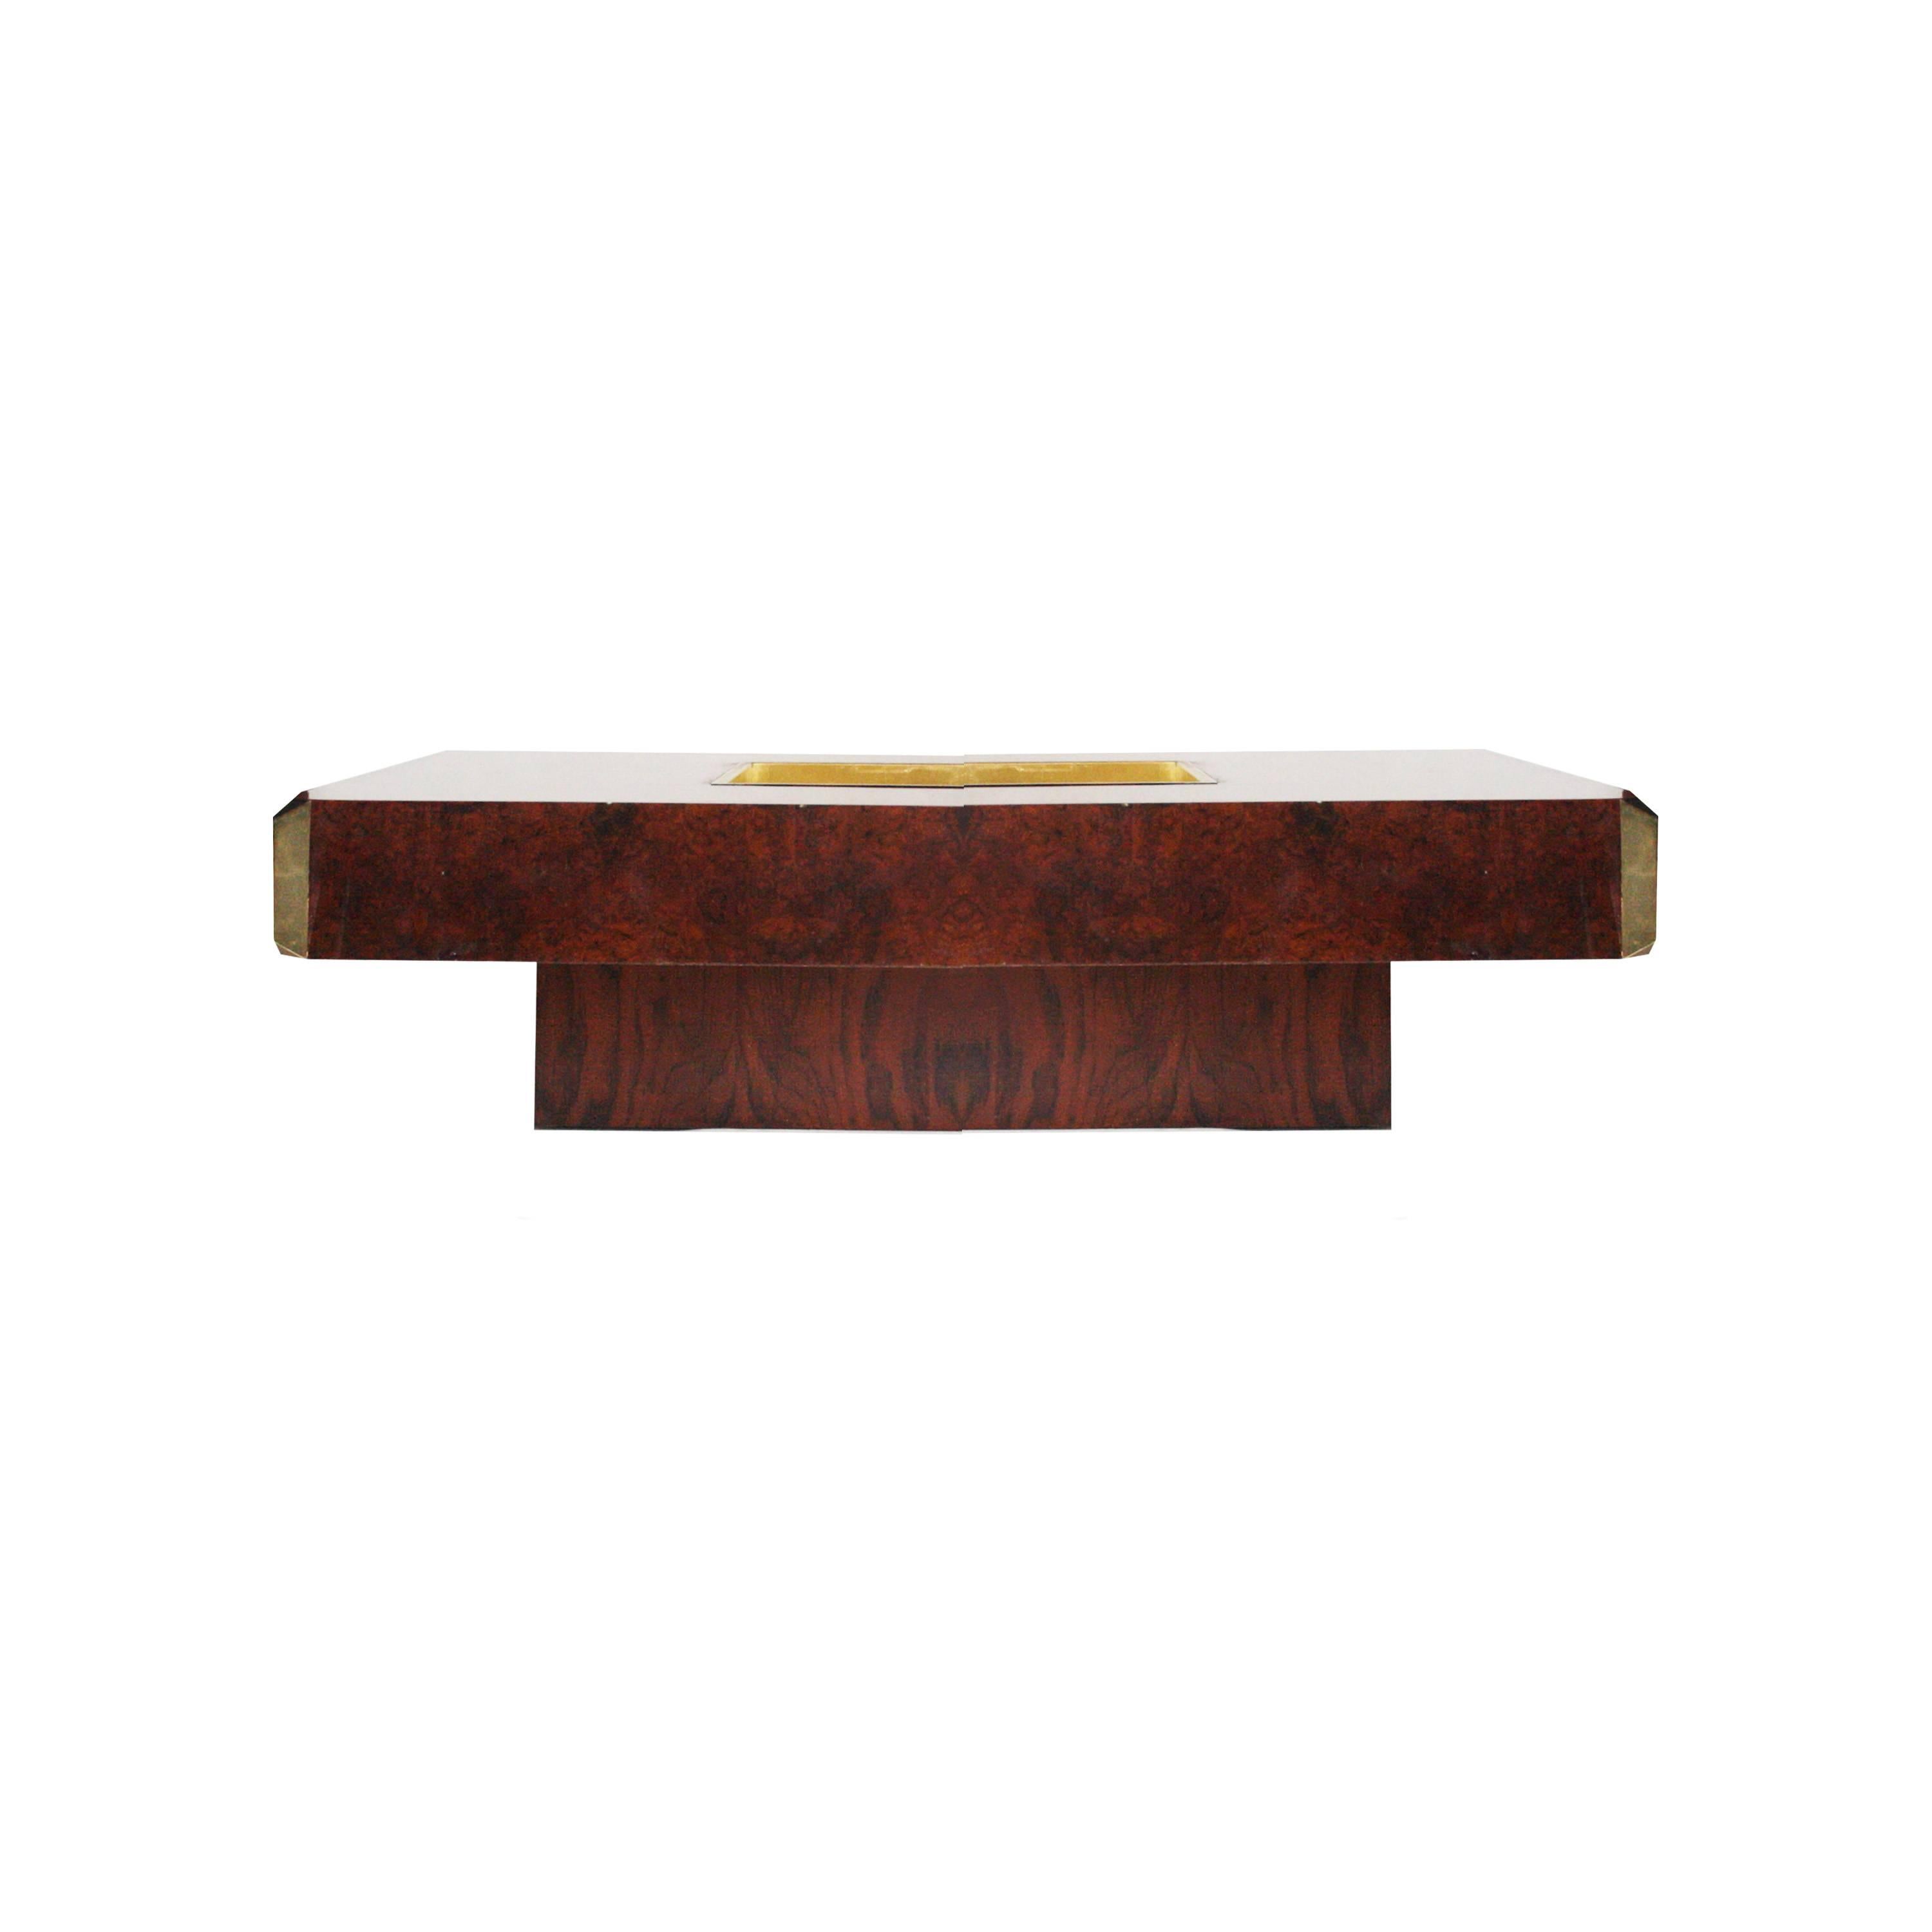 Coffee table designed by Willy Rizzo (1928-2013) solid wood structure covered in thuja root with corners and embossed wine rack made of brass.